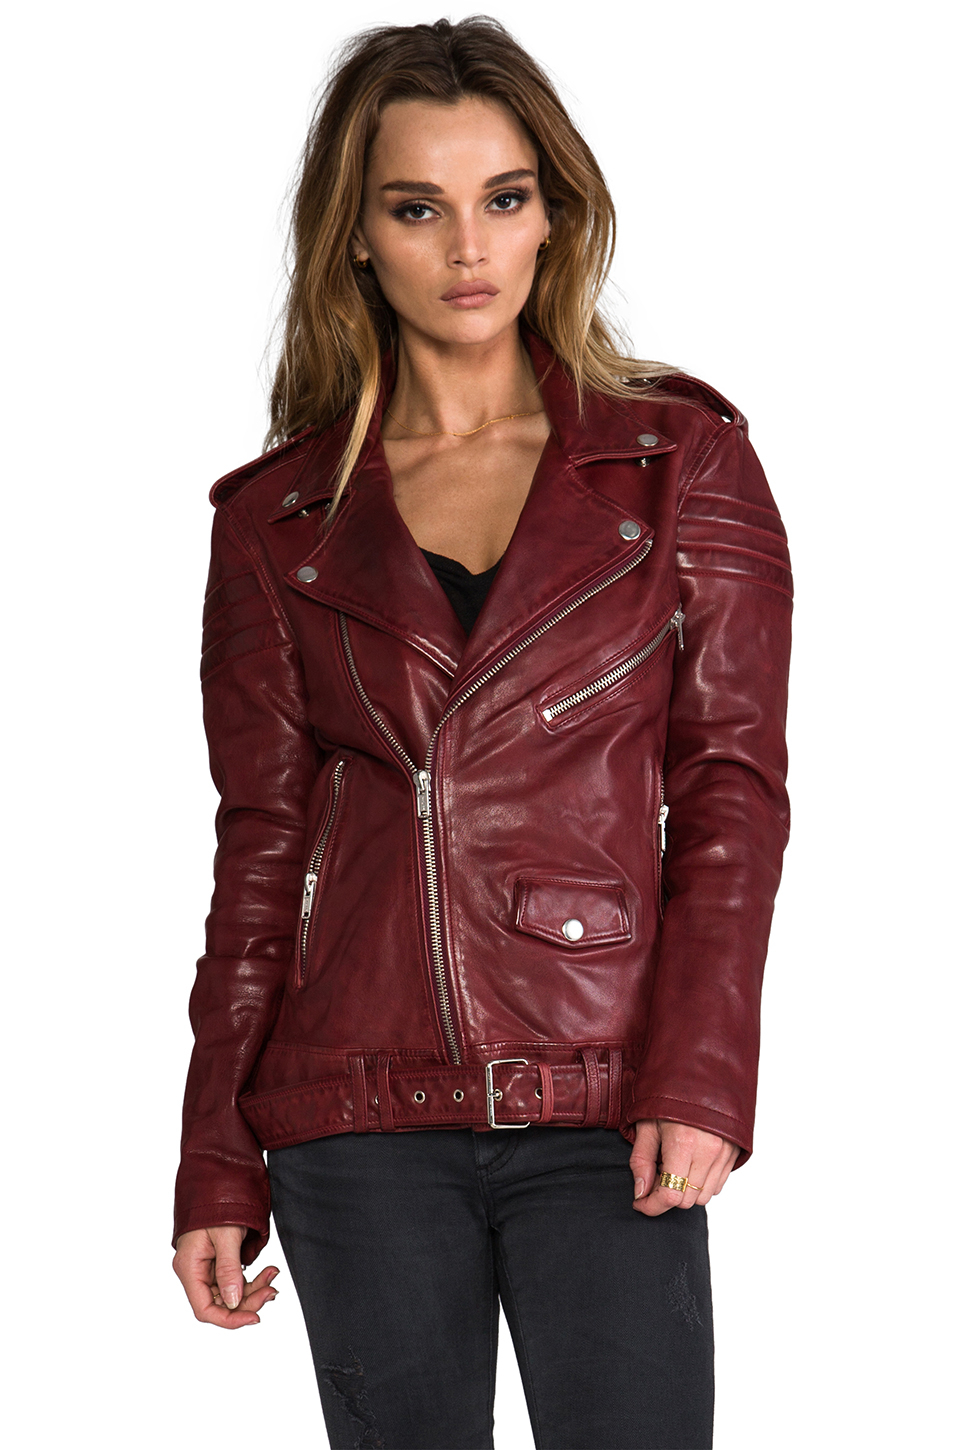 Lyst - Blk dnm Leather Jacket 8 in Red